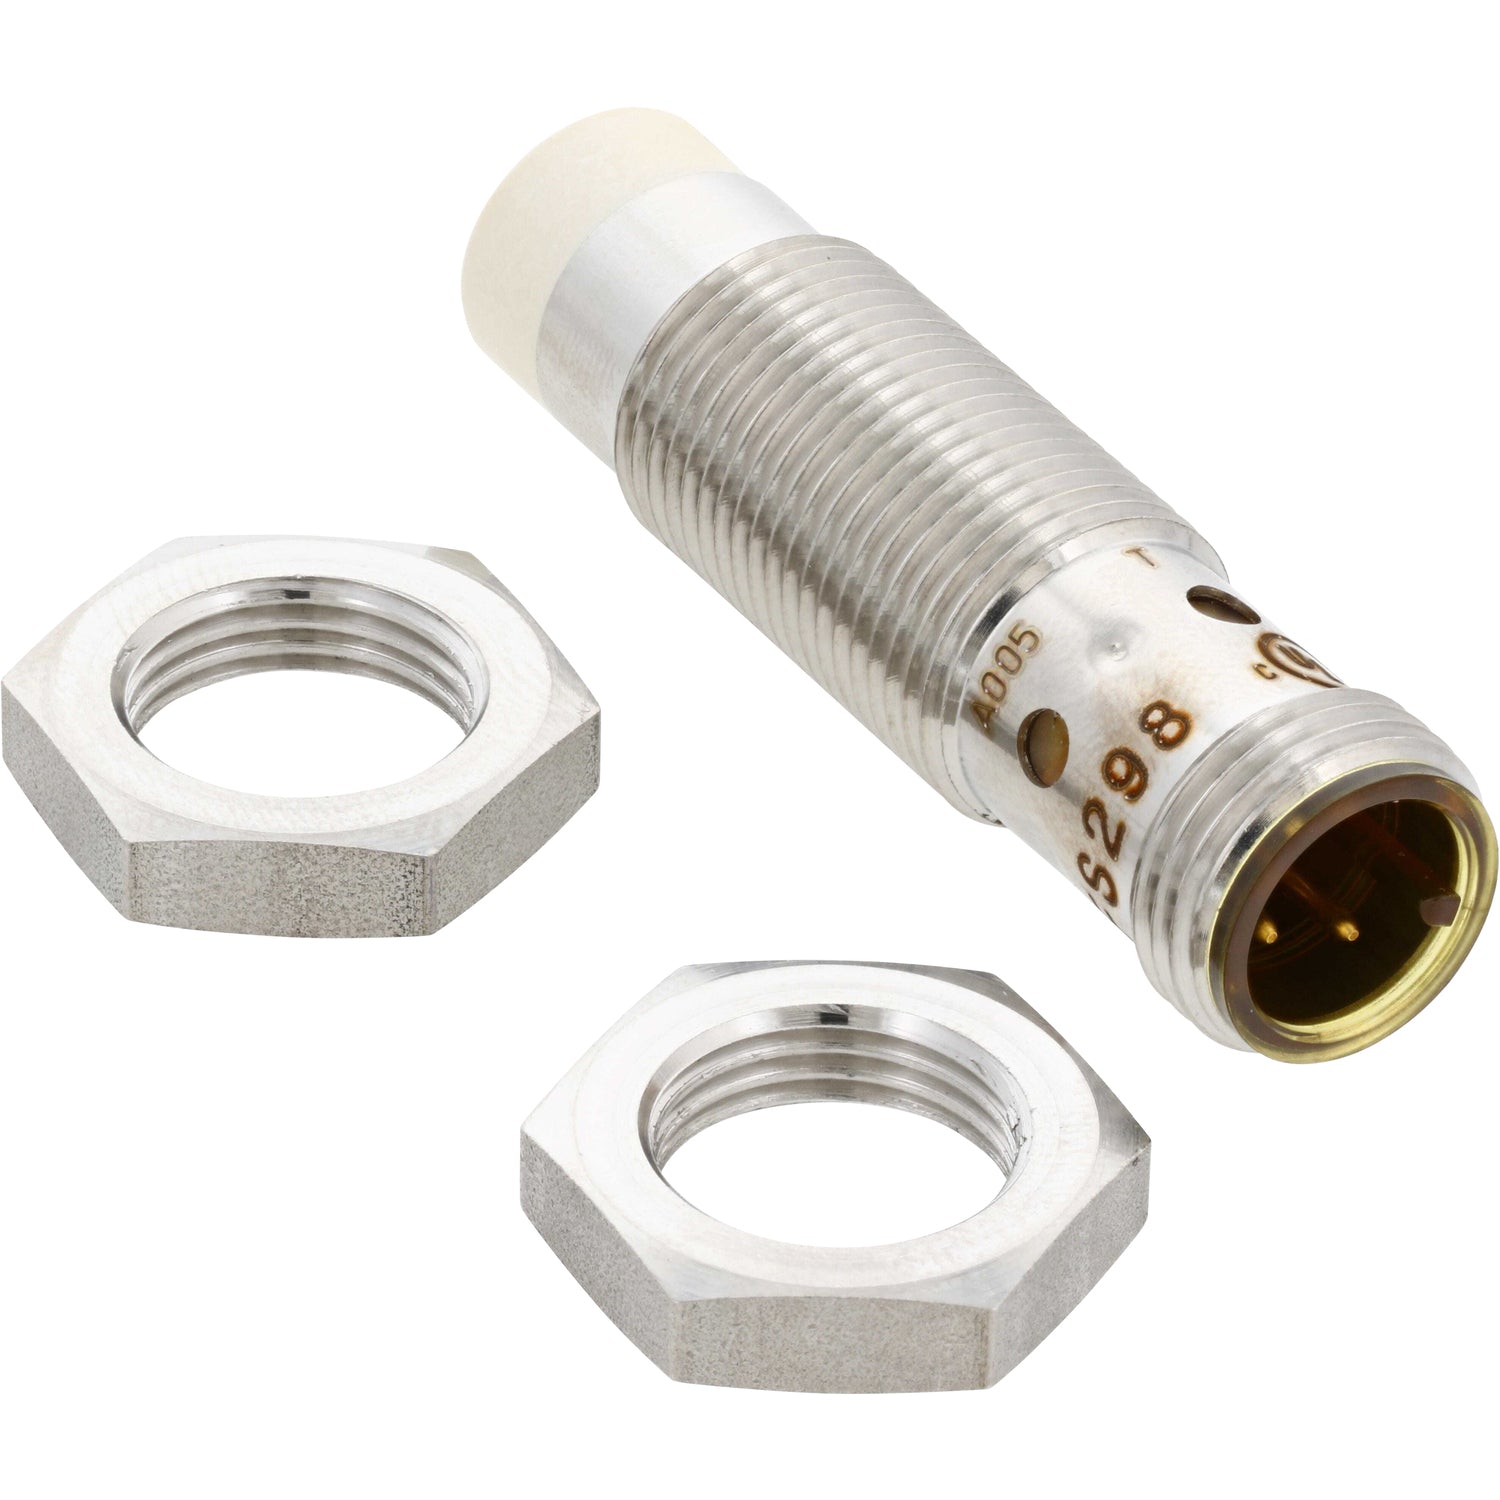 Threaded inductive sensor with white tipped cap and two stainless steel hex nuts on white background. IFS298